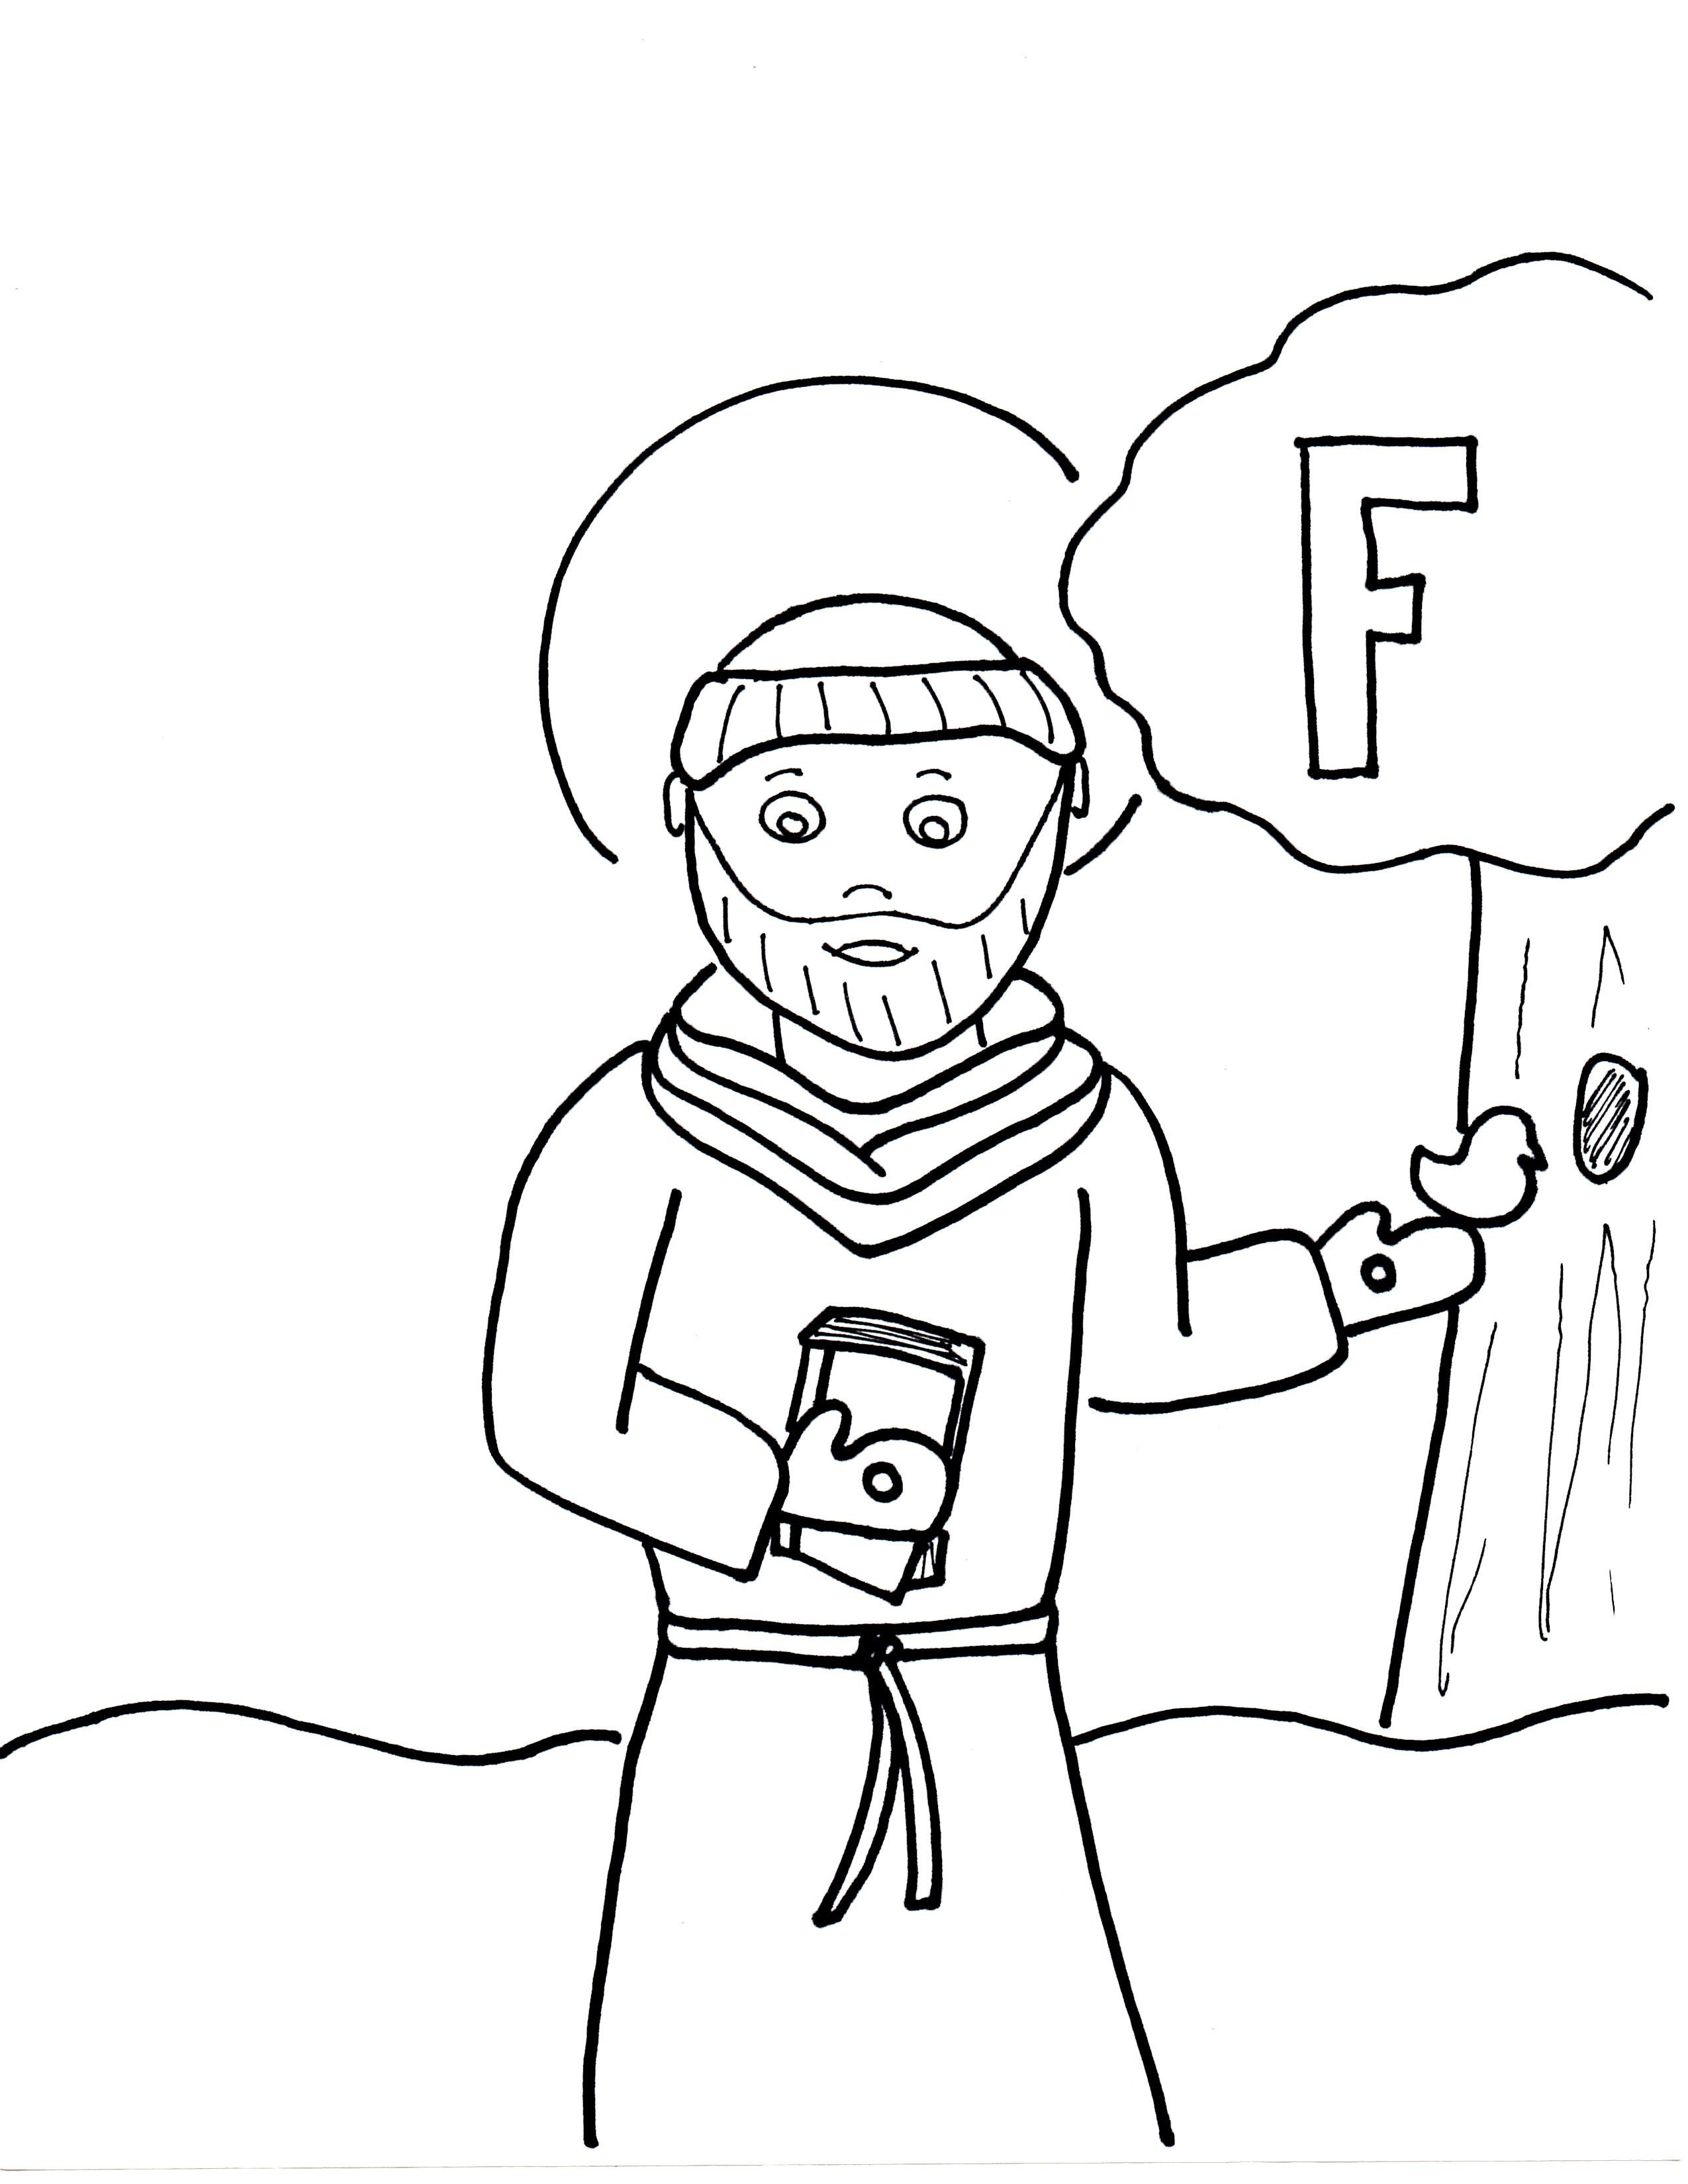 Saint Francis Of Assisi coloring page